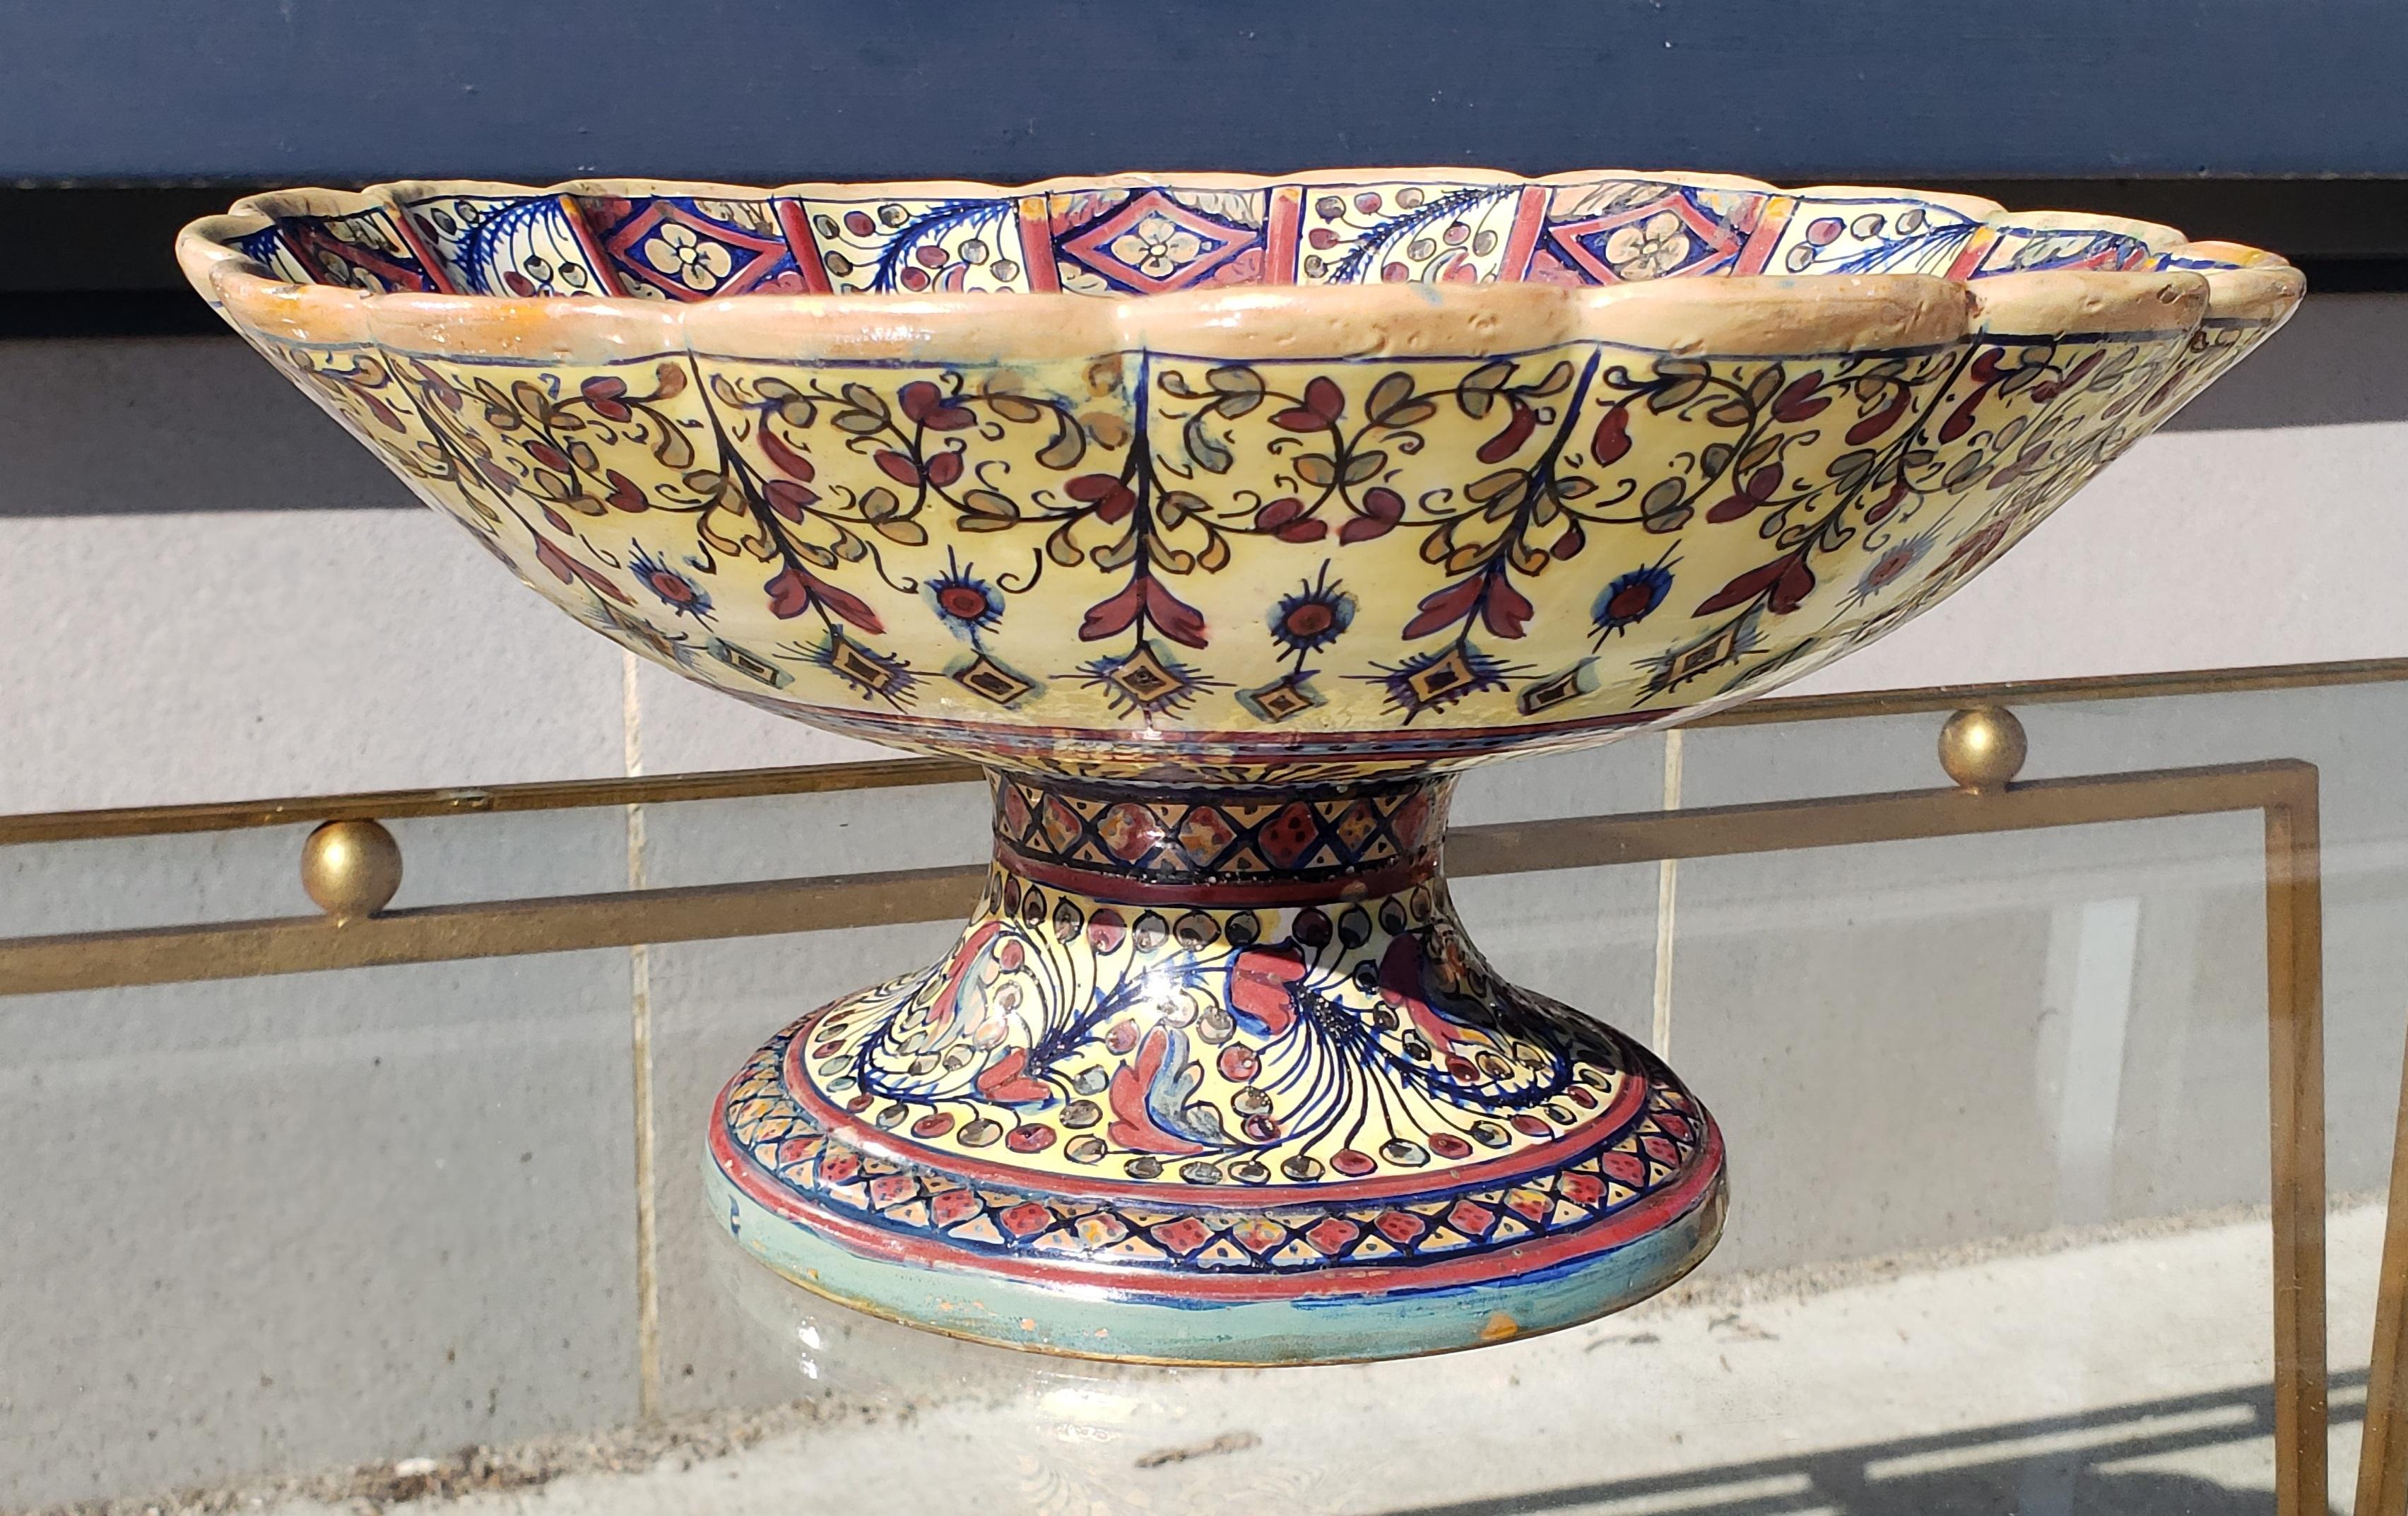 Late 19th century footed Urbino ware bowl attributed to Alfredo Santarelli. Hand thrown and Majolica glazed with lustre.